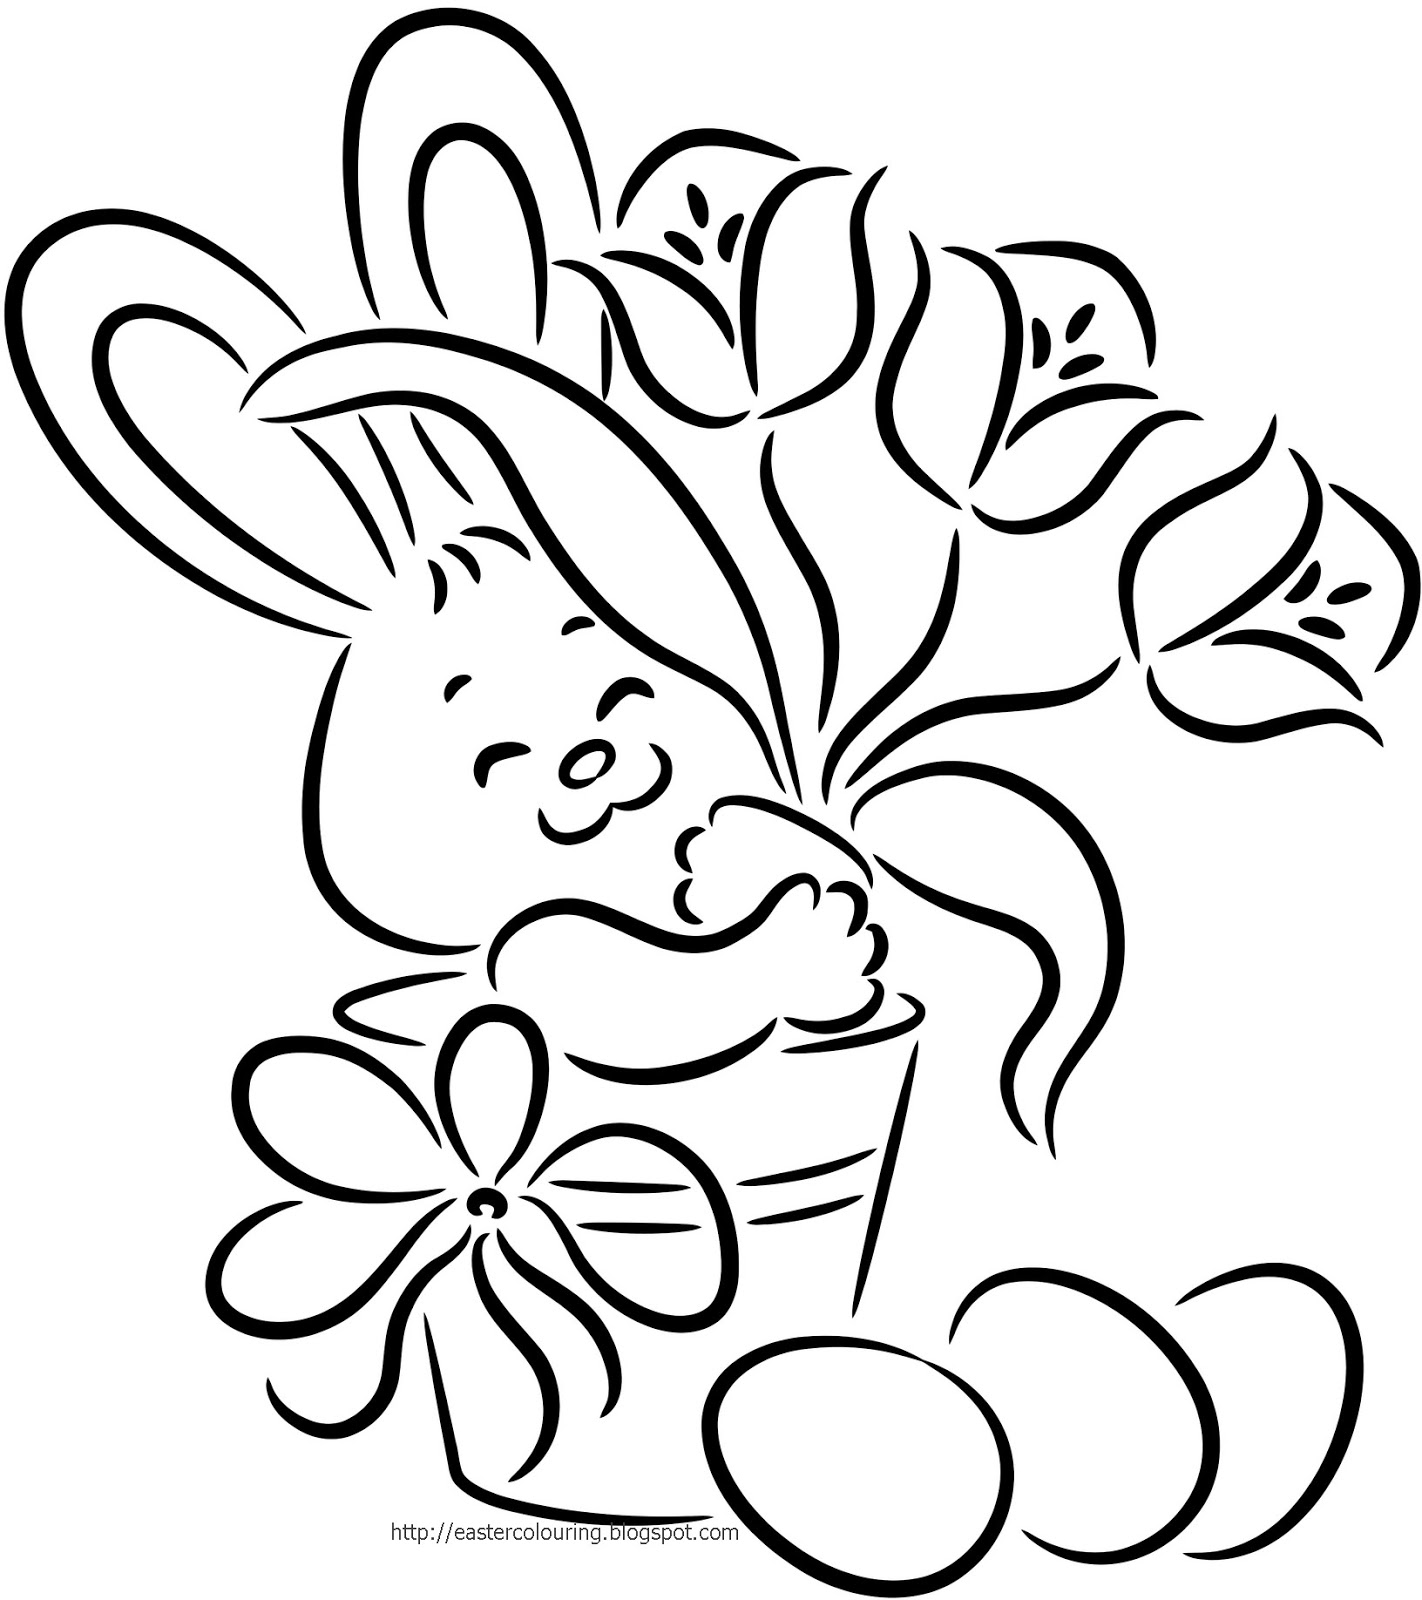 EASTER COLOURING